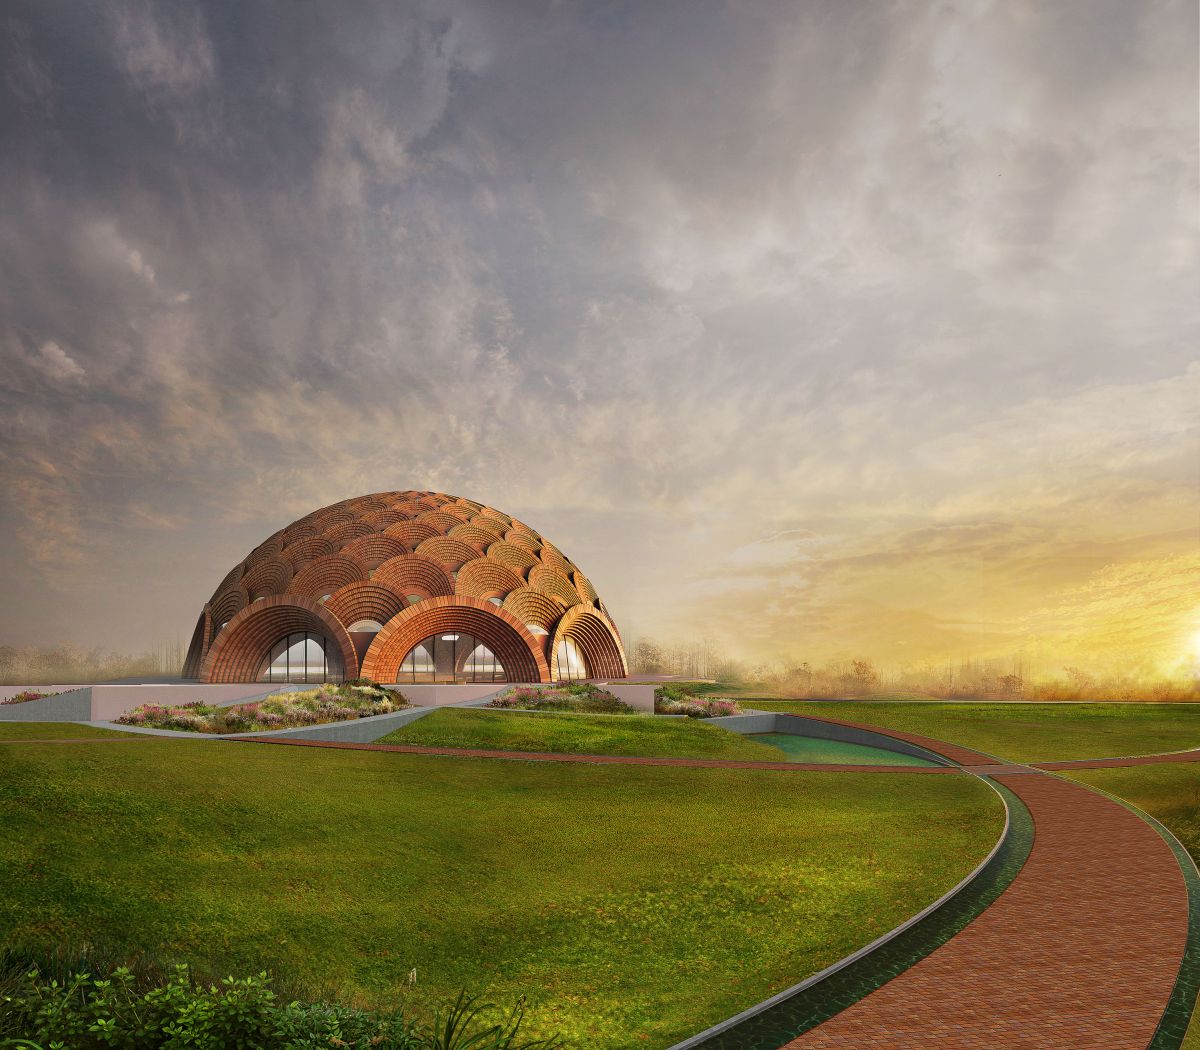 Baha'I Temple at Bihar, an award winning proposal by Spacematters 4